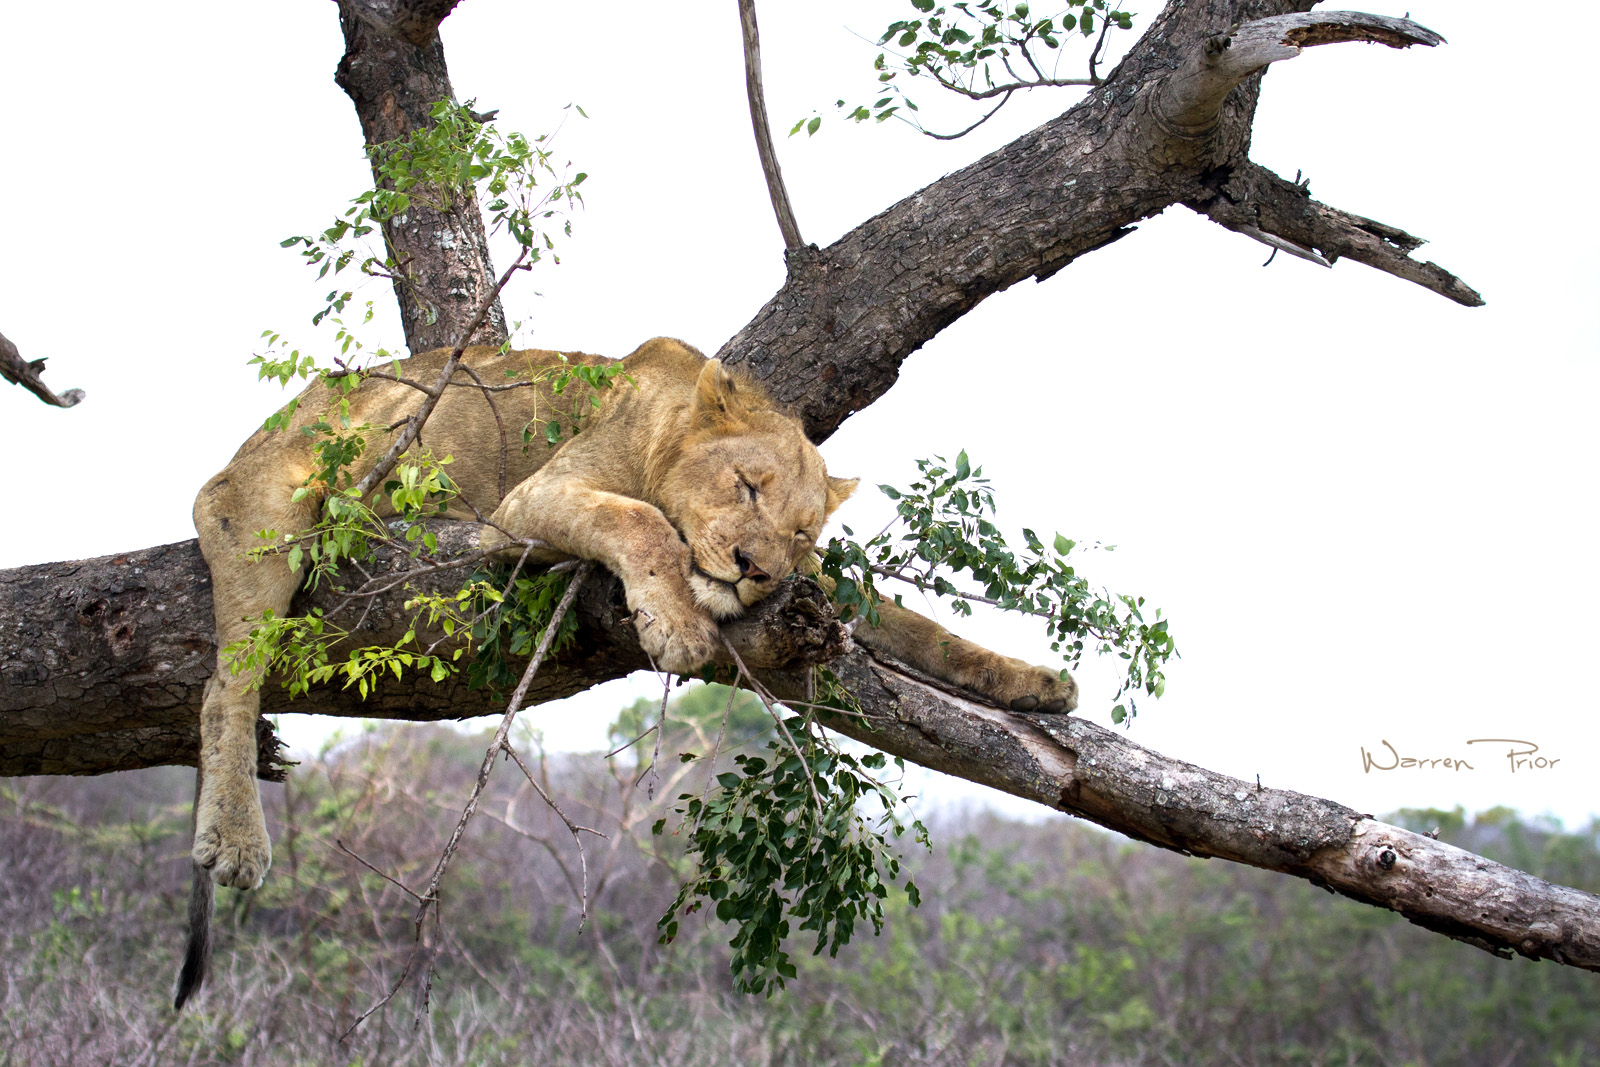 This photo of a lioness was taken at iMfolozi, one of the few parks where lions climb trees